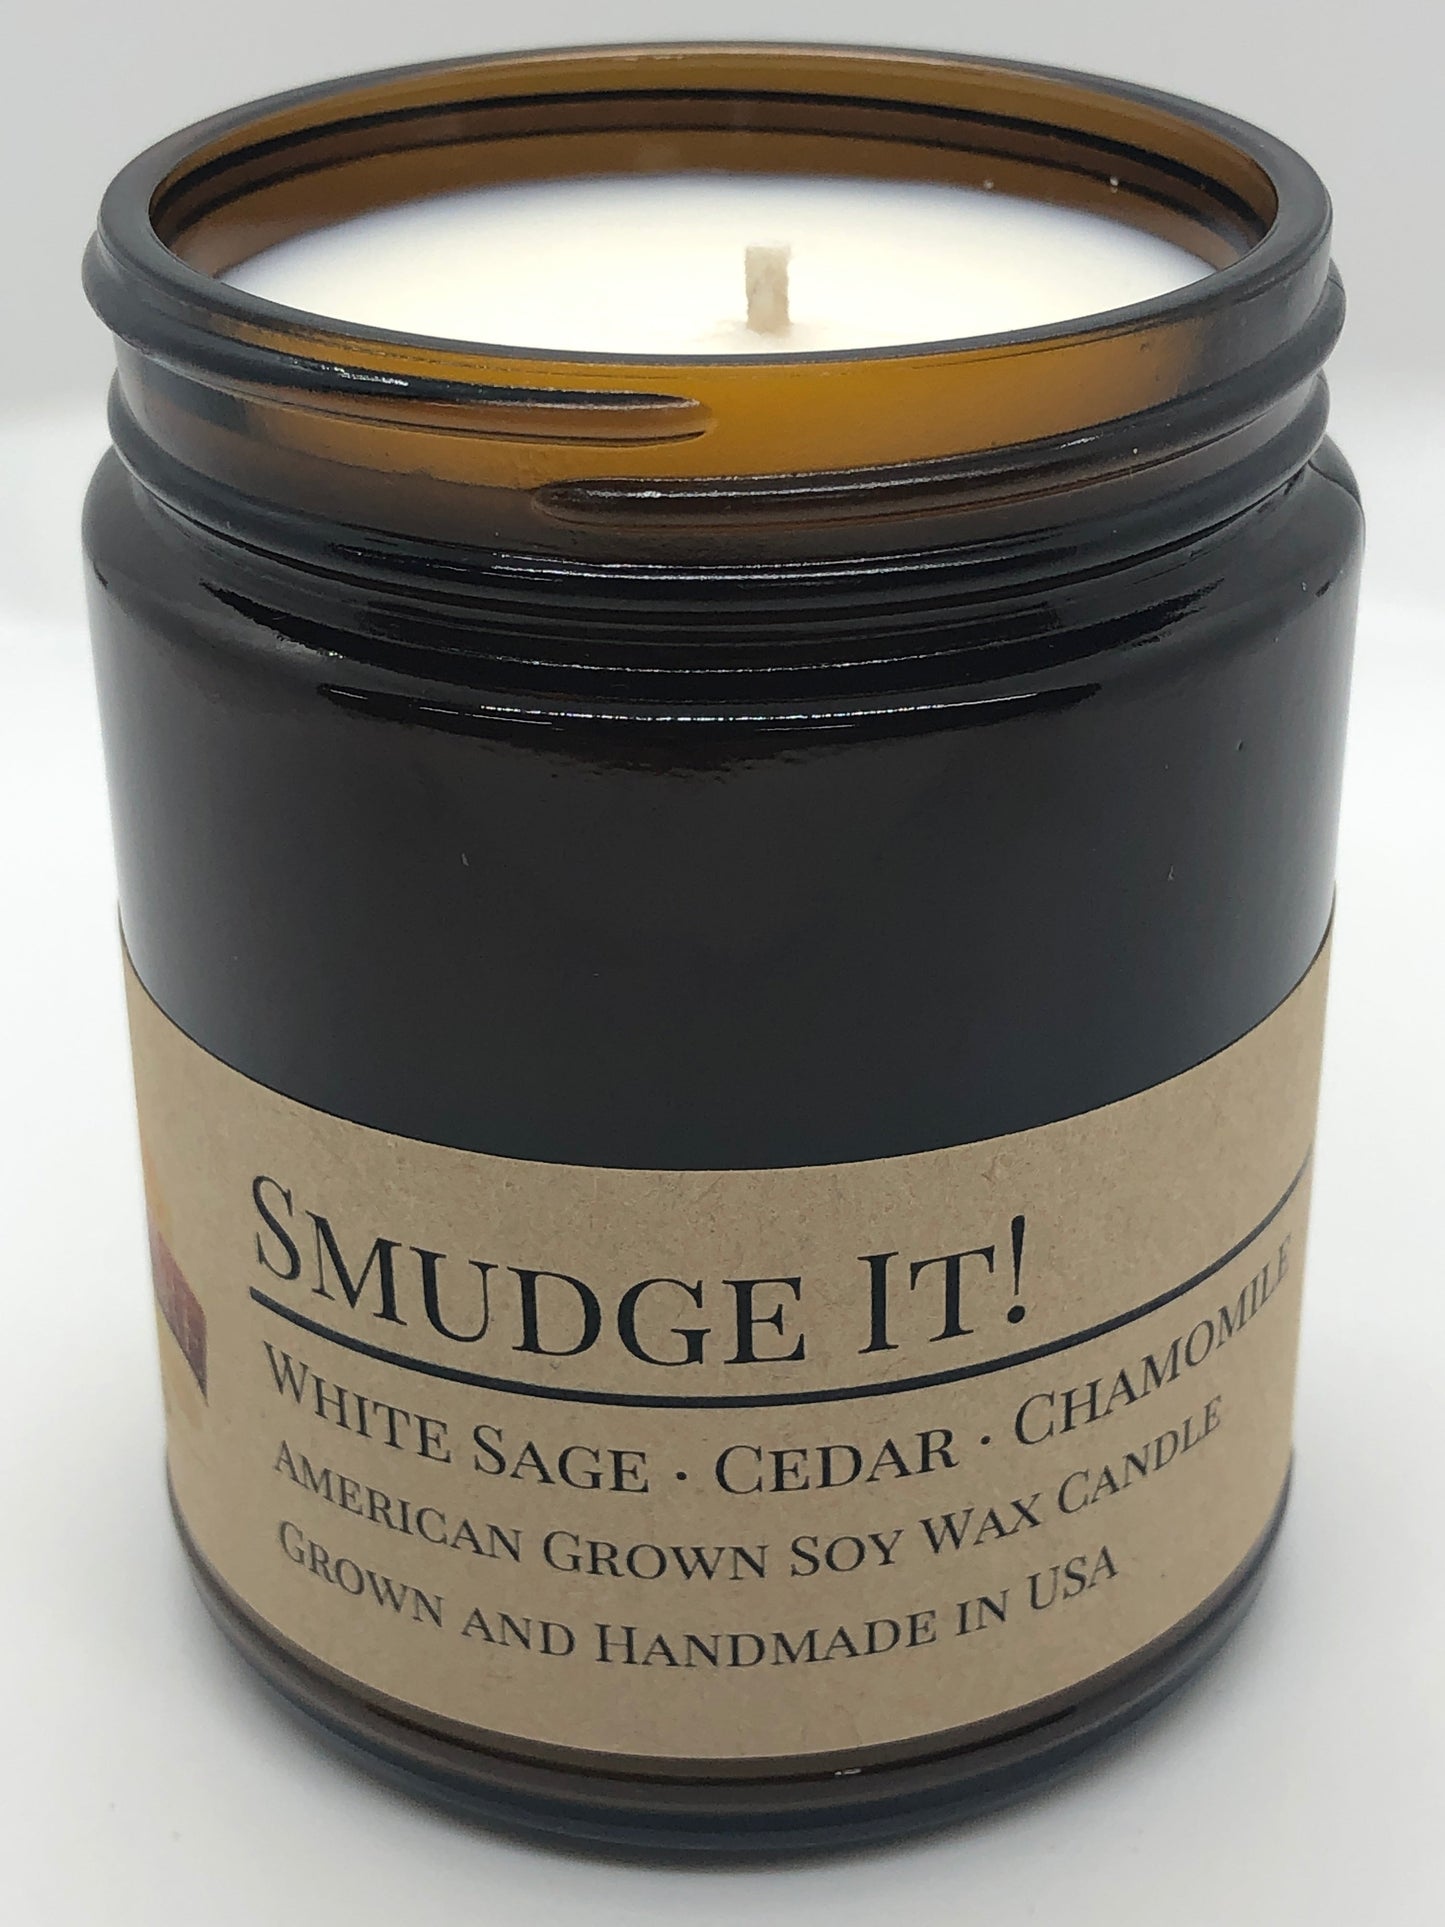 Smudge It! Soy Candle | 9 oz Amber Apothecary Jar